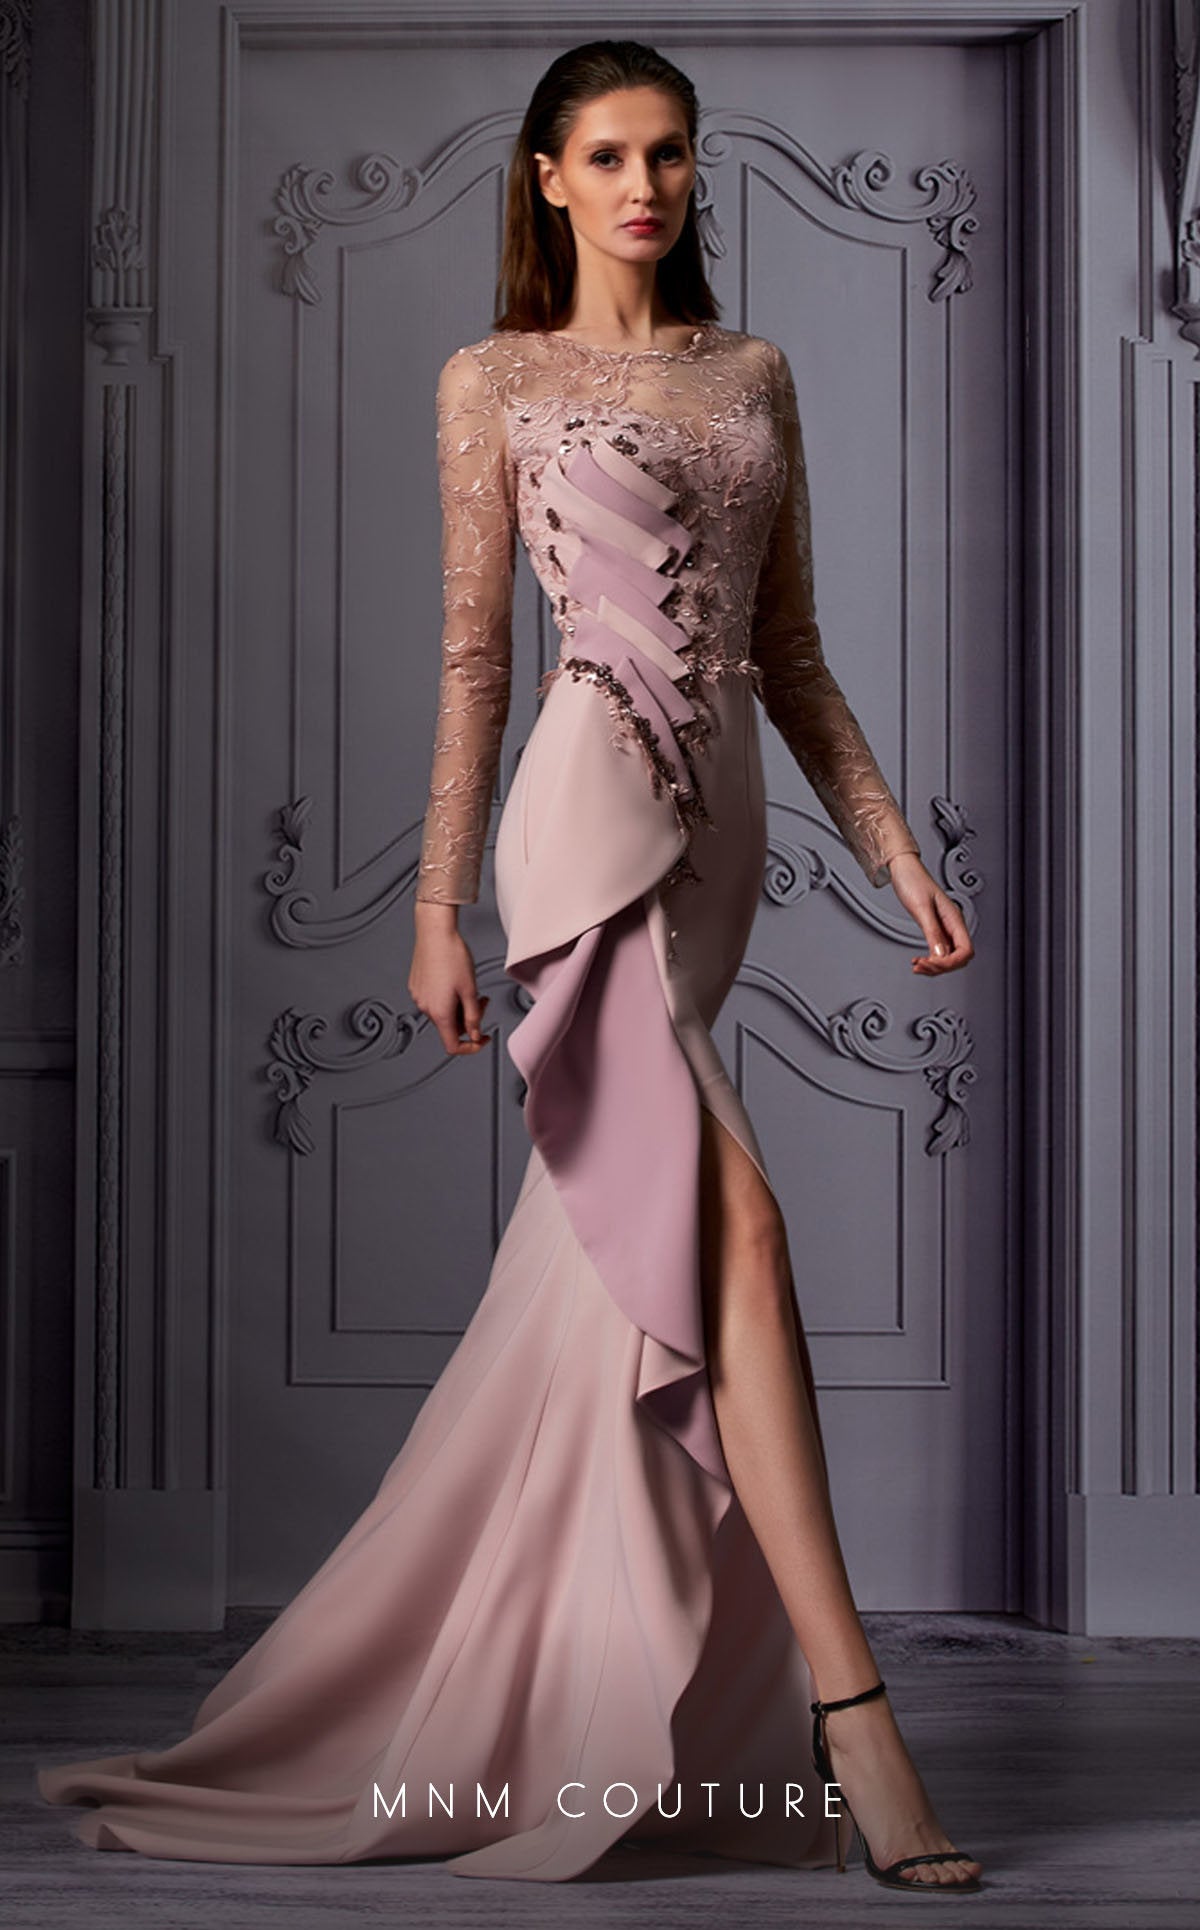 MNM-Couture-K3853-Dress-Marvelous-A-Line-Silhouette-Glittering-Accents-Front-View - Rofial Beauty